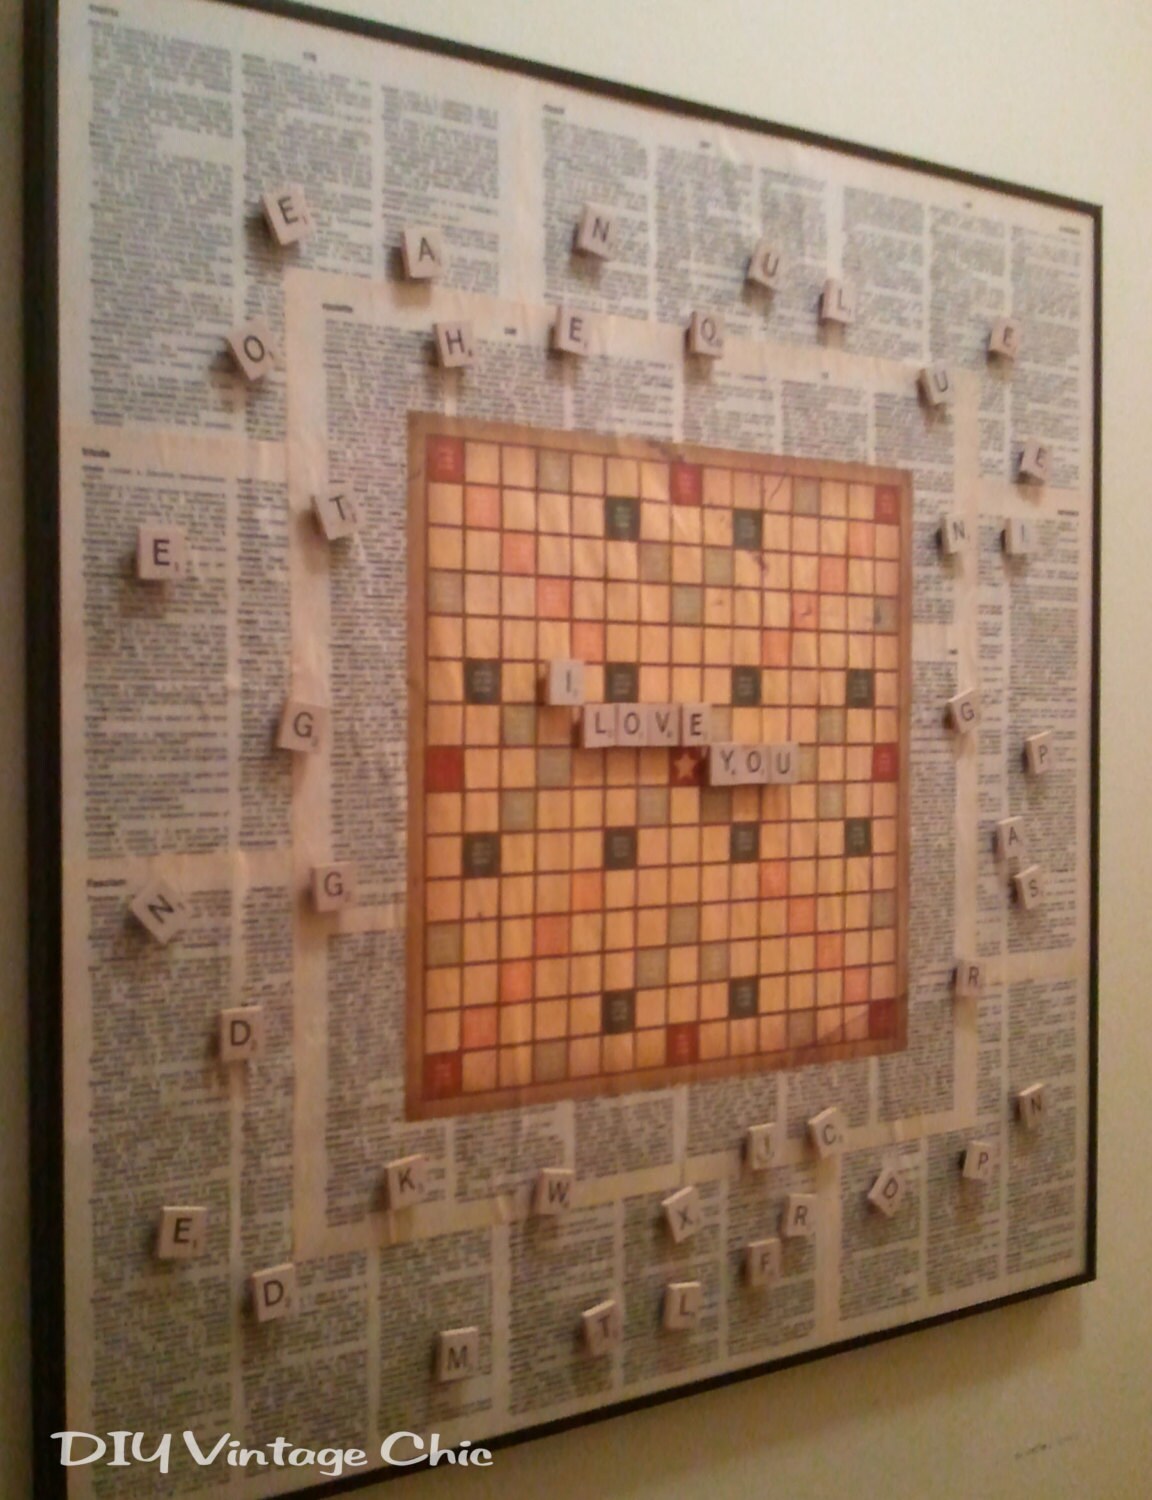 Painted Cork Board DIY, Plan: Hang Separately; Hot-Glue Scrabble Tiles  (Spelling Out Names of Family Members) in Ent…